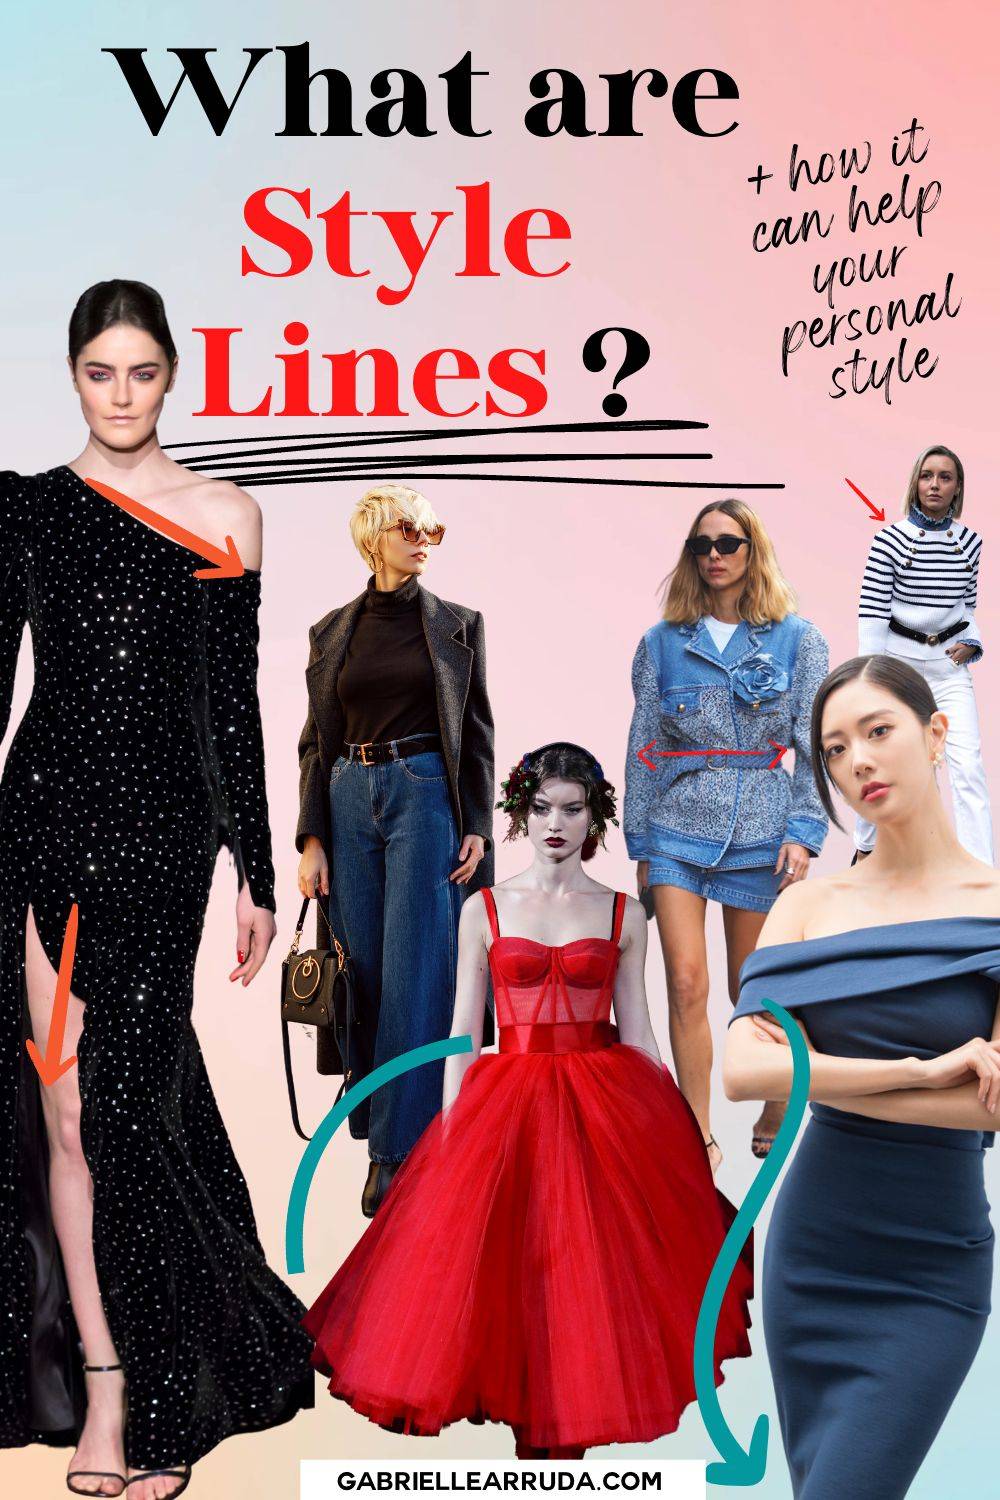 what are style lines and how can they help your personal style